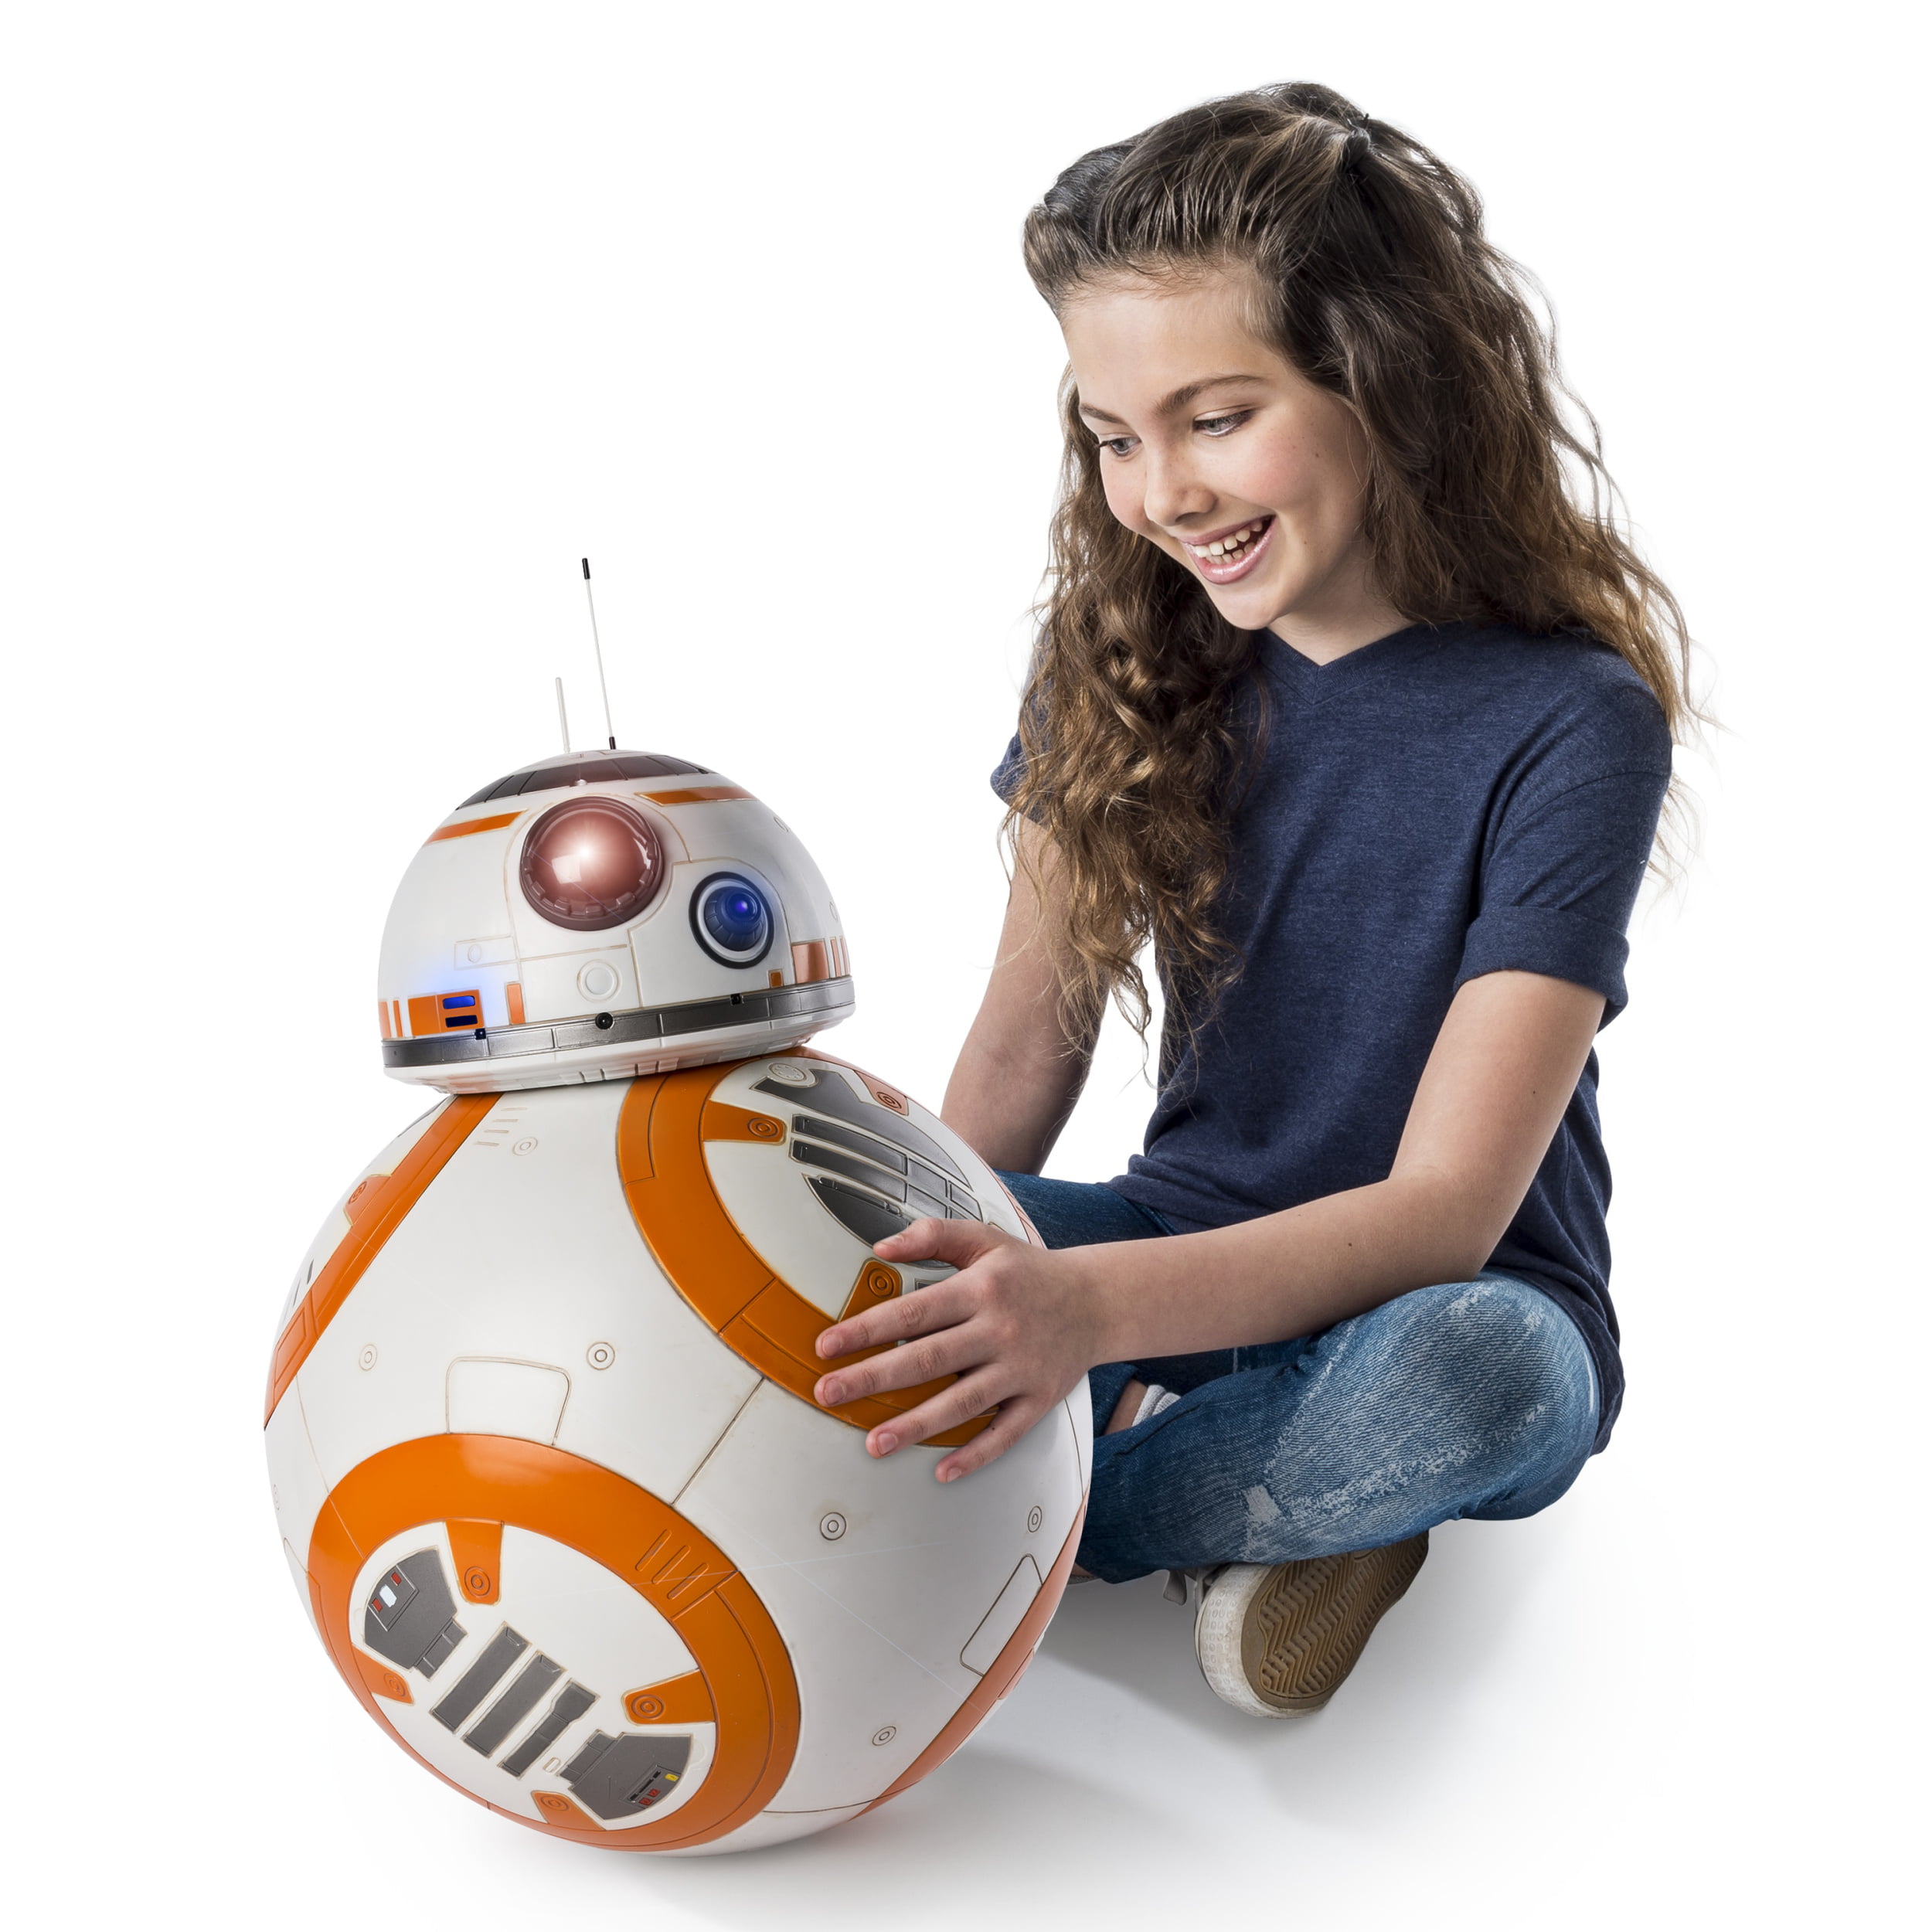  Star Wars The Last Jedi BB-8 Robot Toy, Collector's